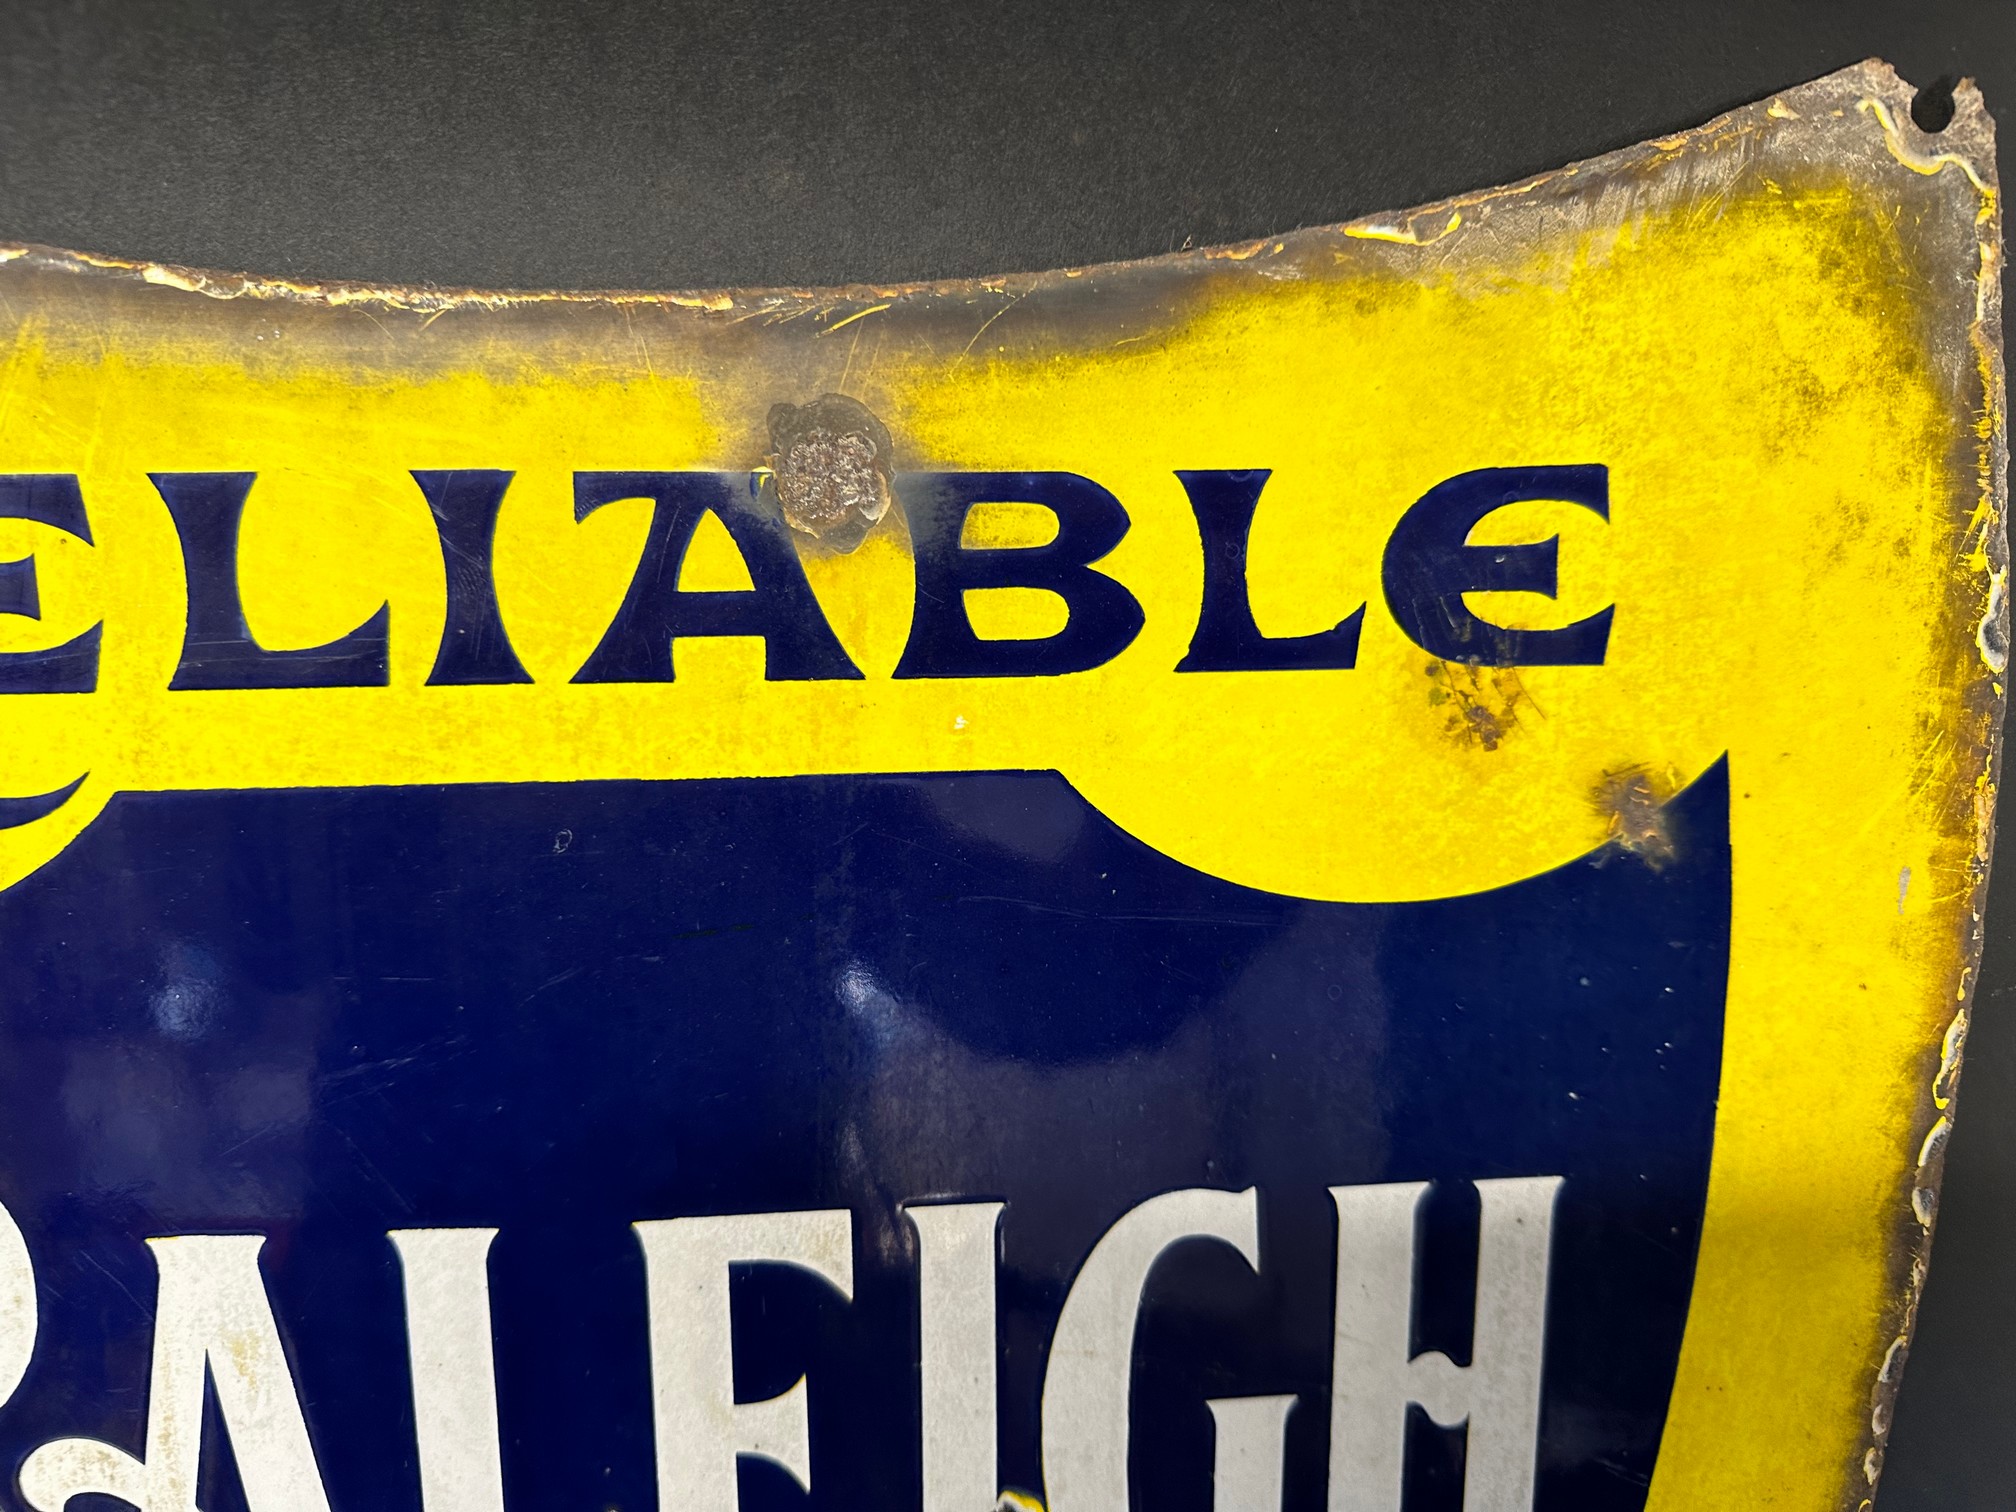 A Raleigh Cycles - Reliable, Rigid Rapid shield-shaped double sided enamel advertising sign, 17 3/ - Image 3 of 6